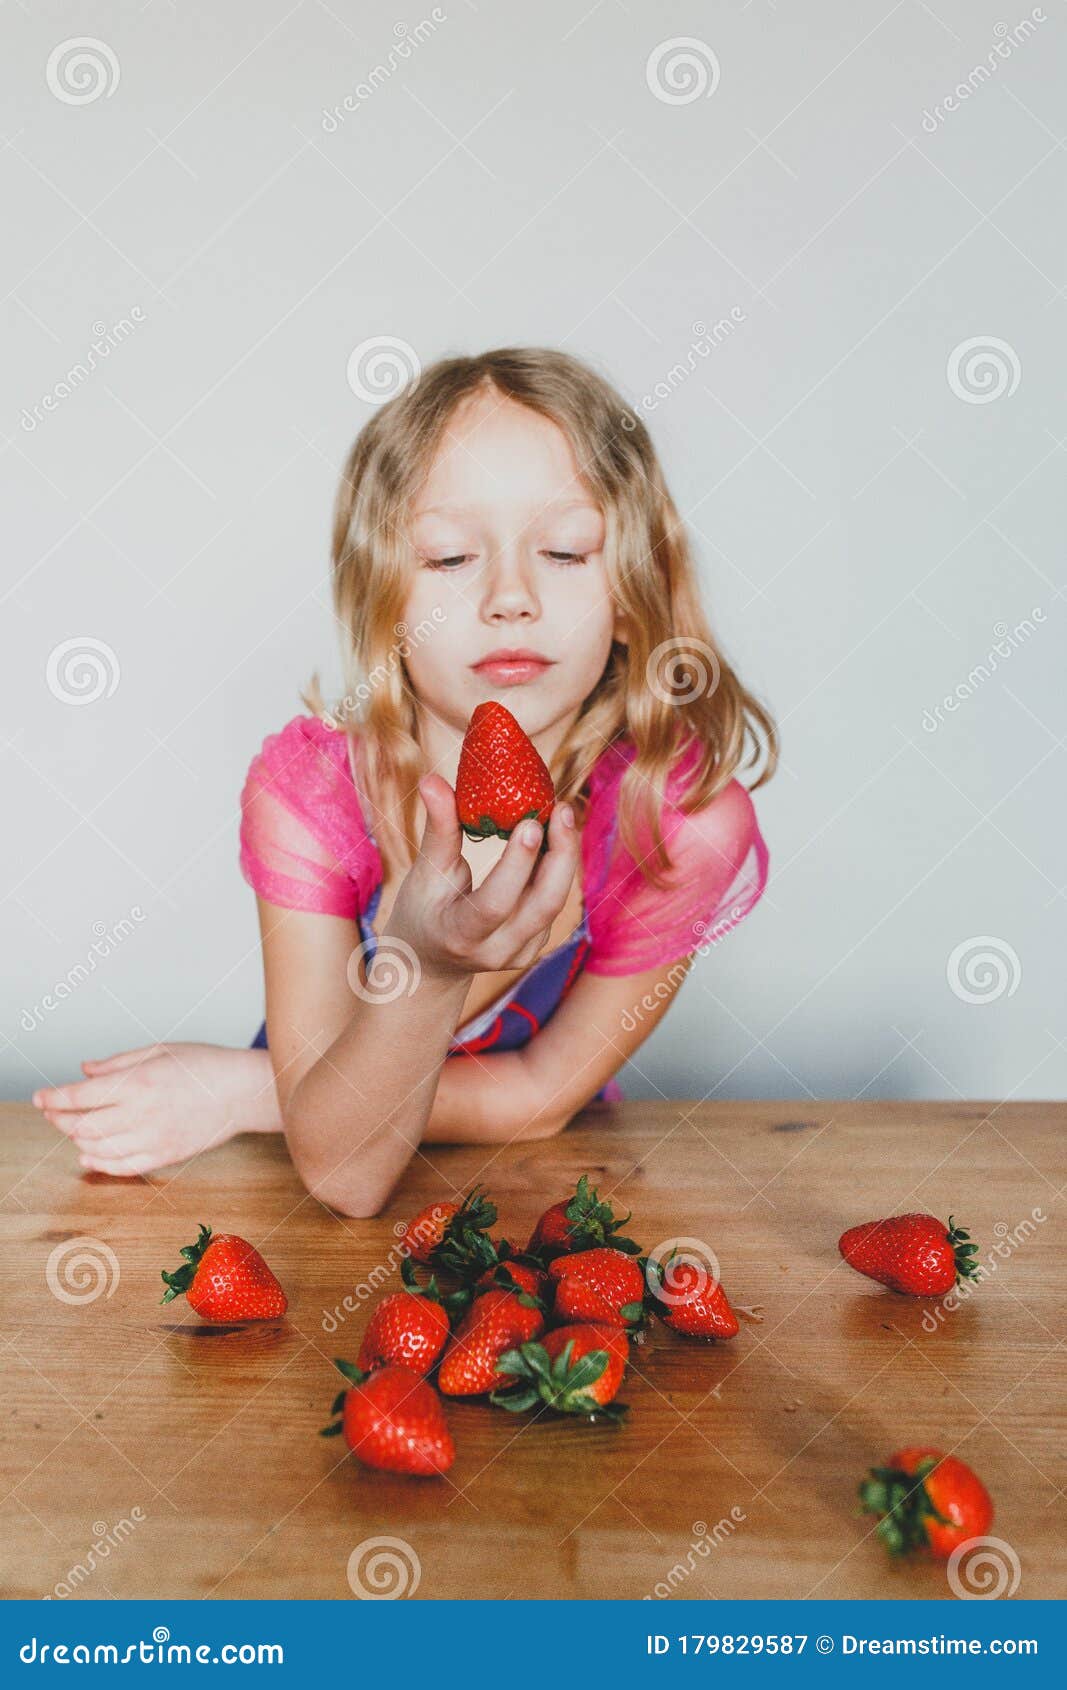 Cute European Girl Eating Strawberries A Beautiful Cheerful Blonde With Blue Eyes Stock Image 